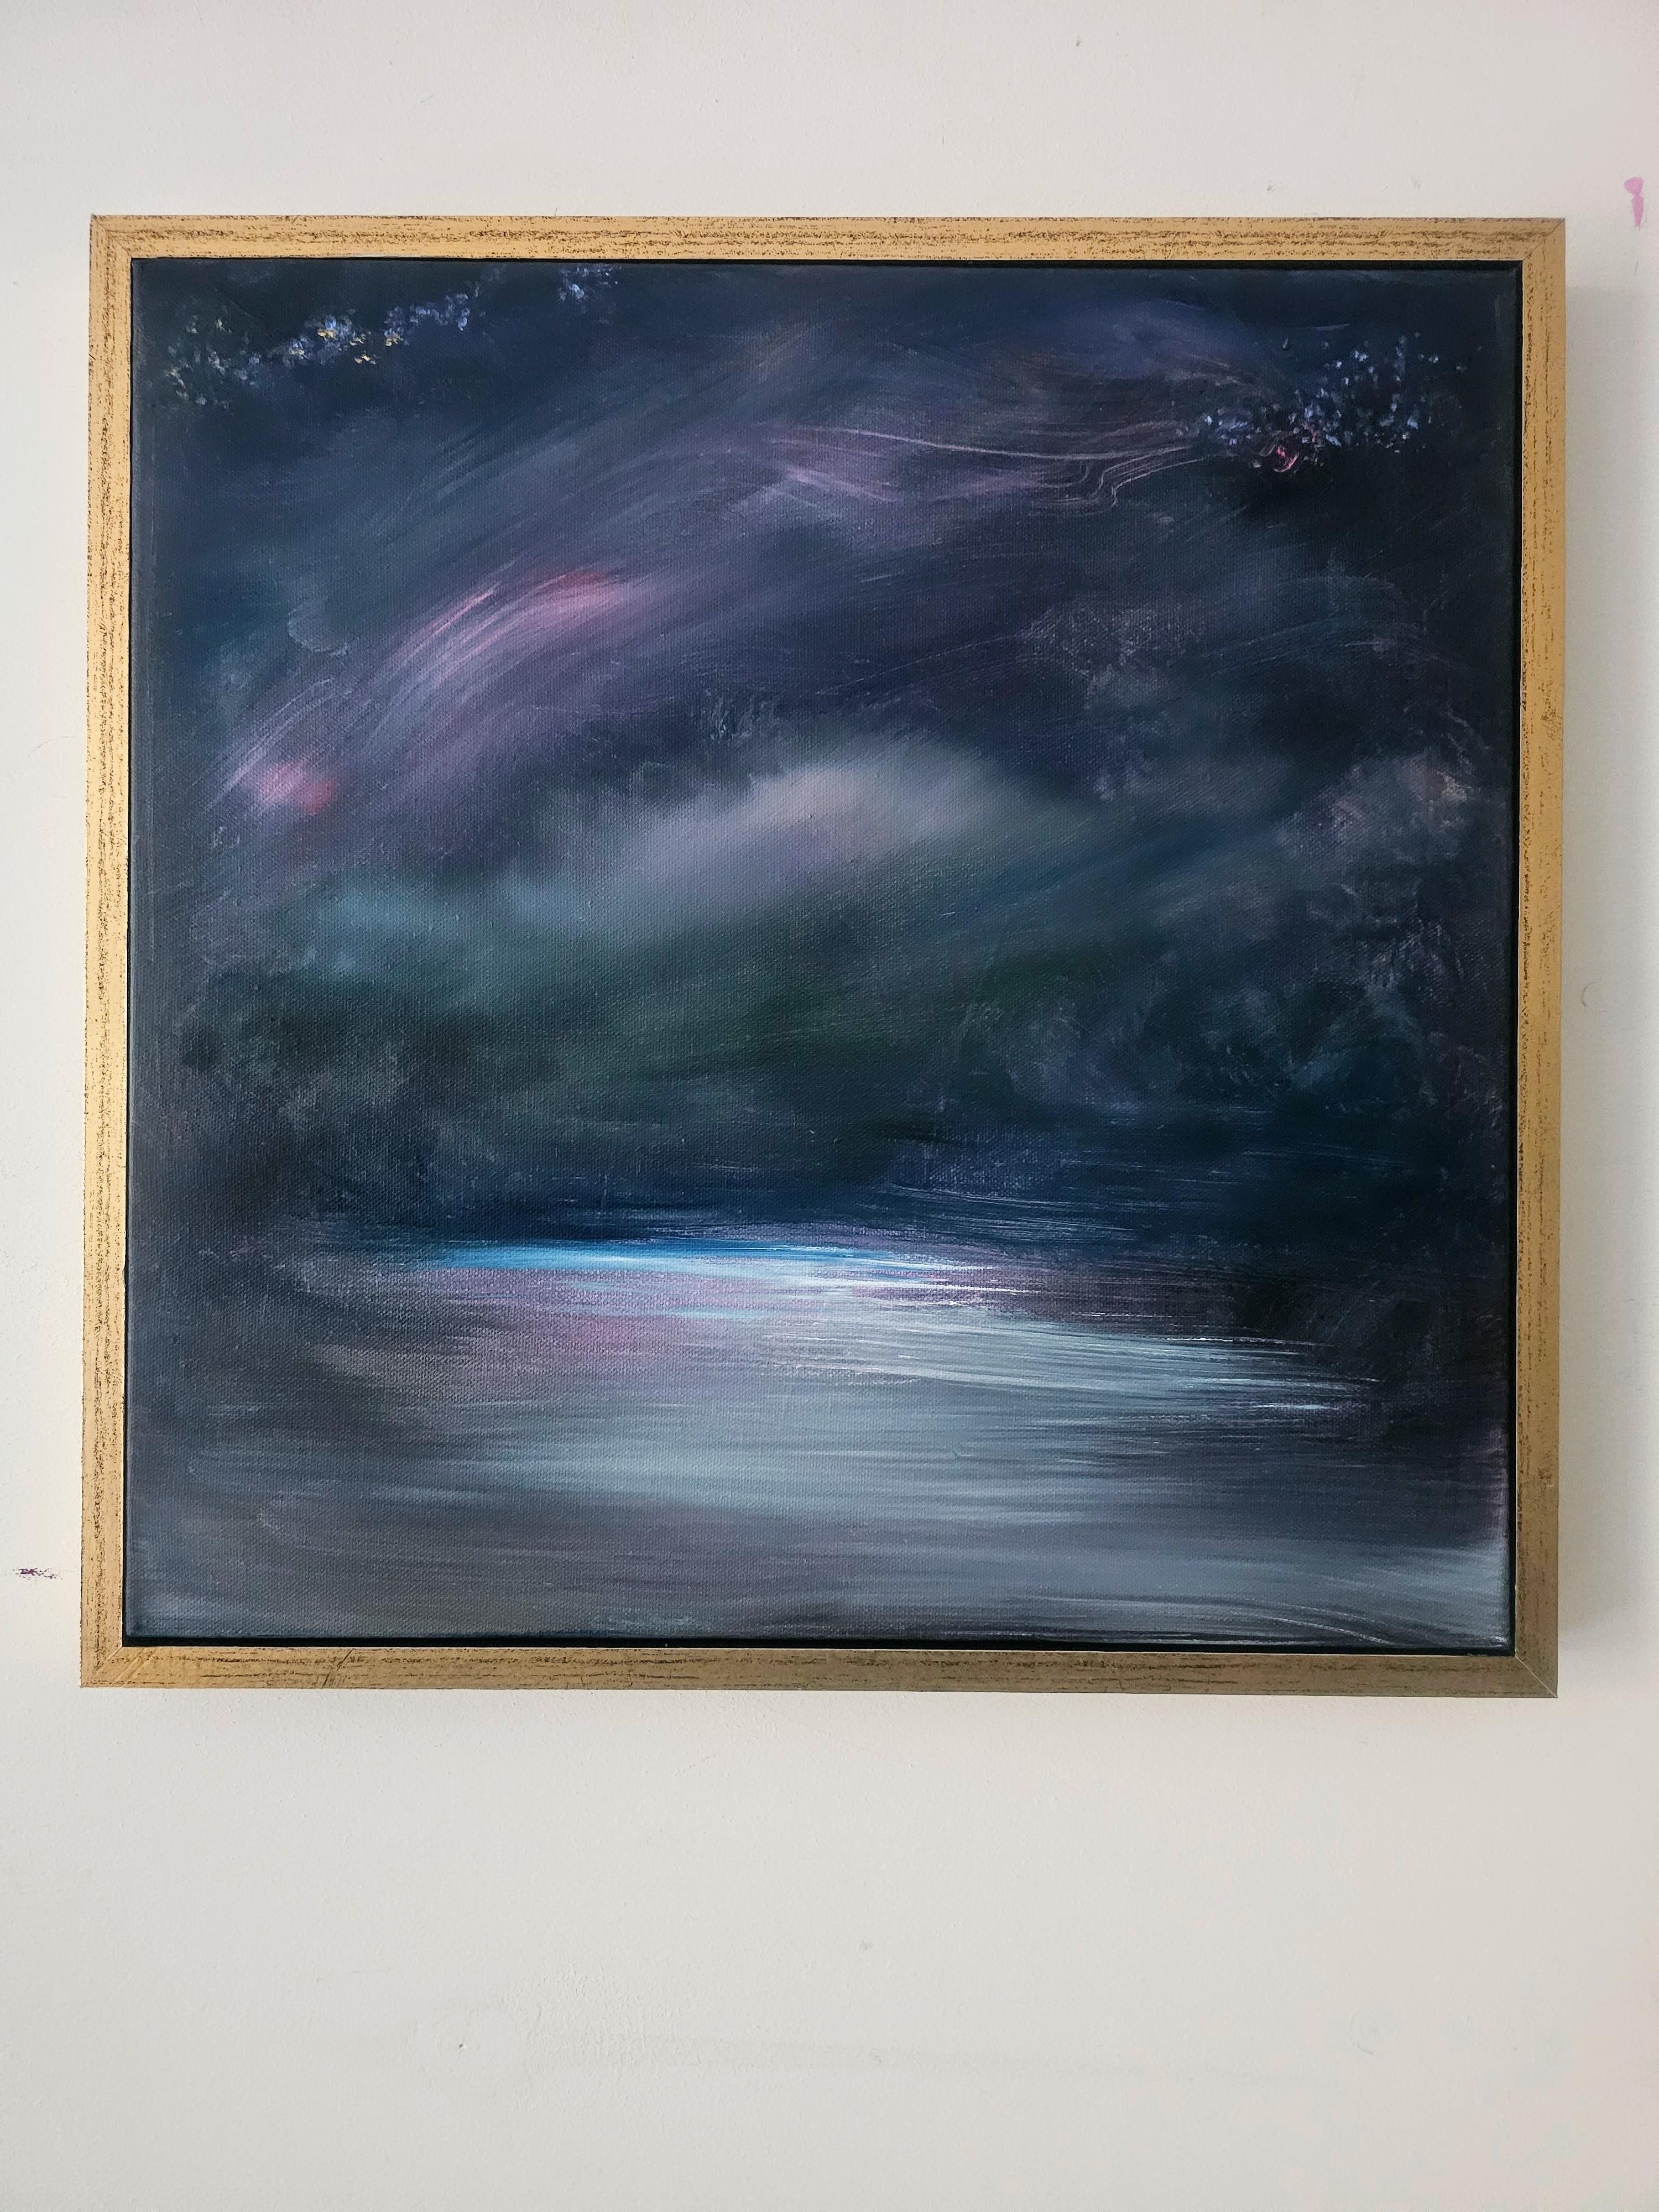 The long walk home - Framed abstract night sky seascape painting For Sale 1